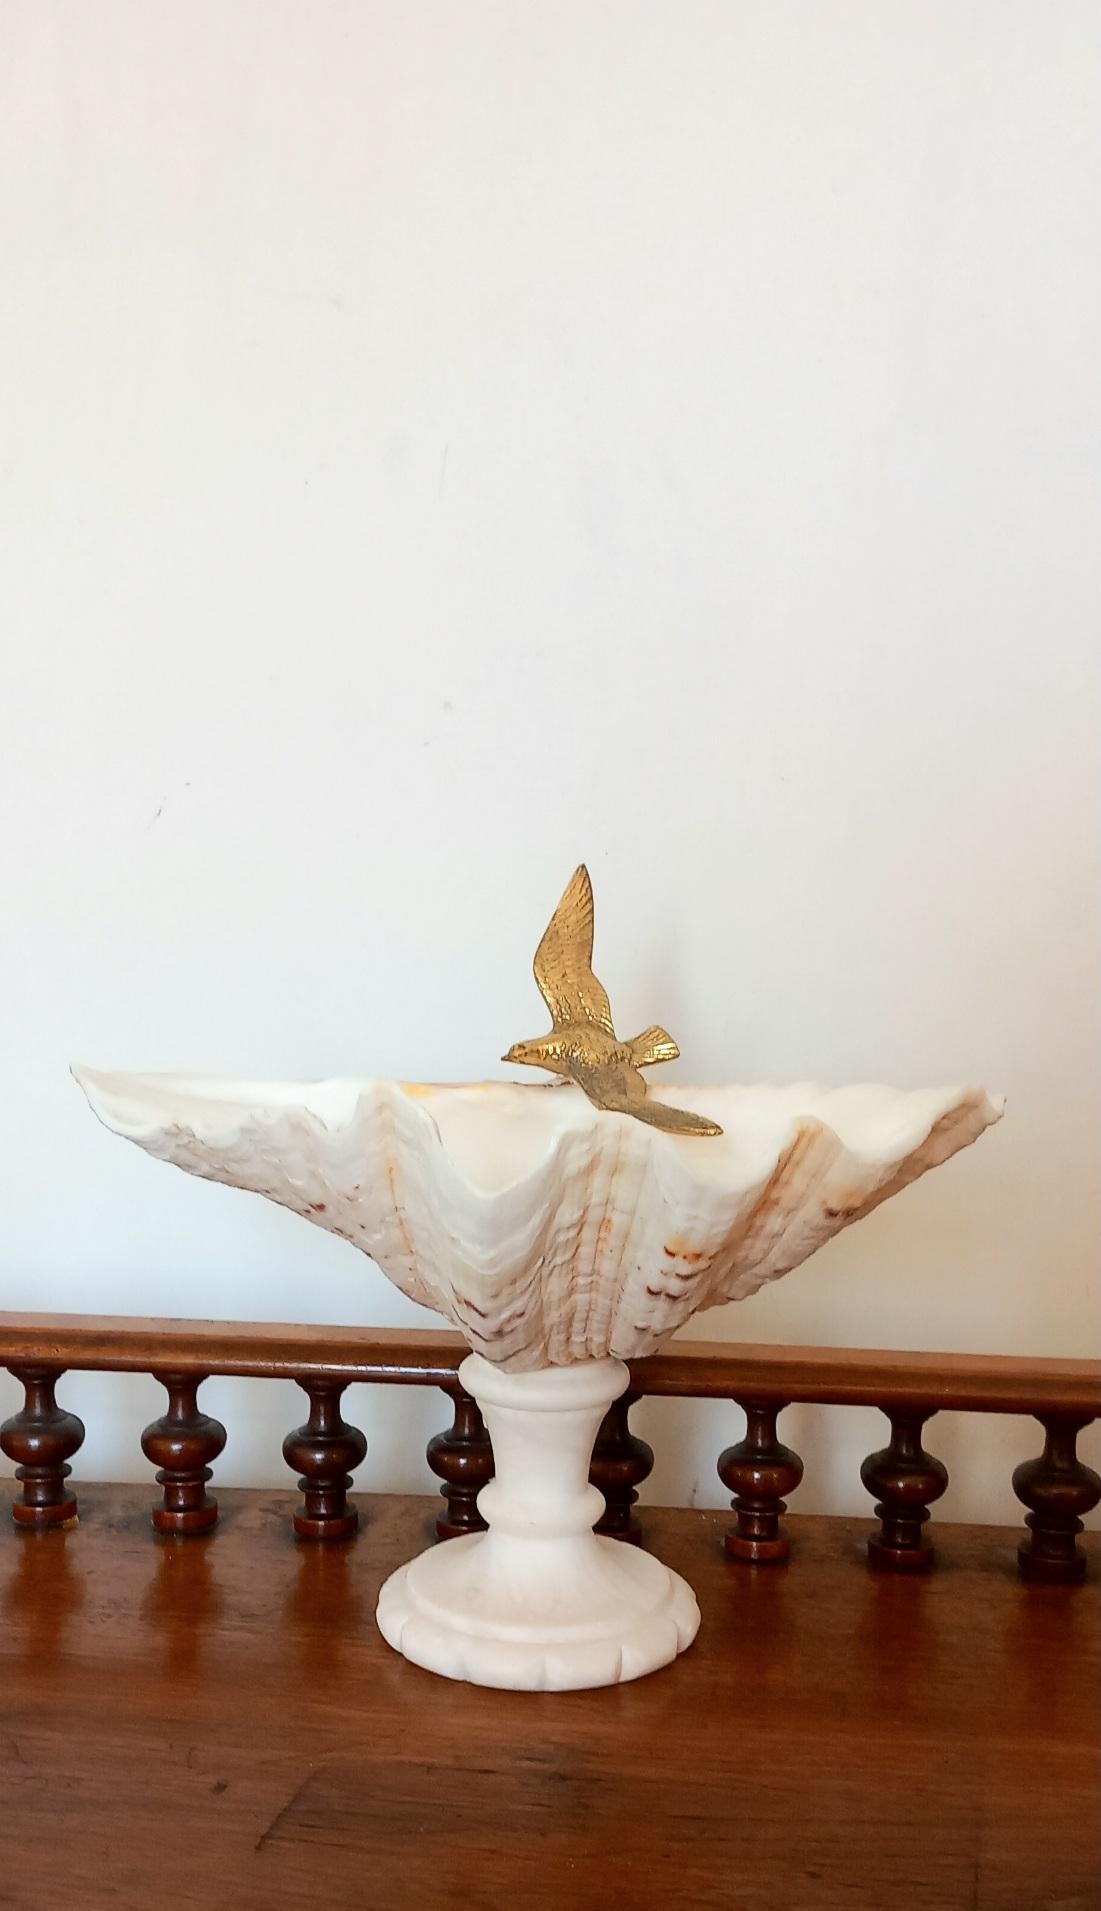  Shell Natural Specimen  With White Marble Pedestal Bronze Bird Can Be Removed For Sale 11